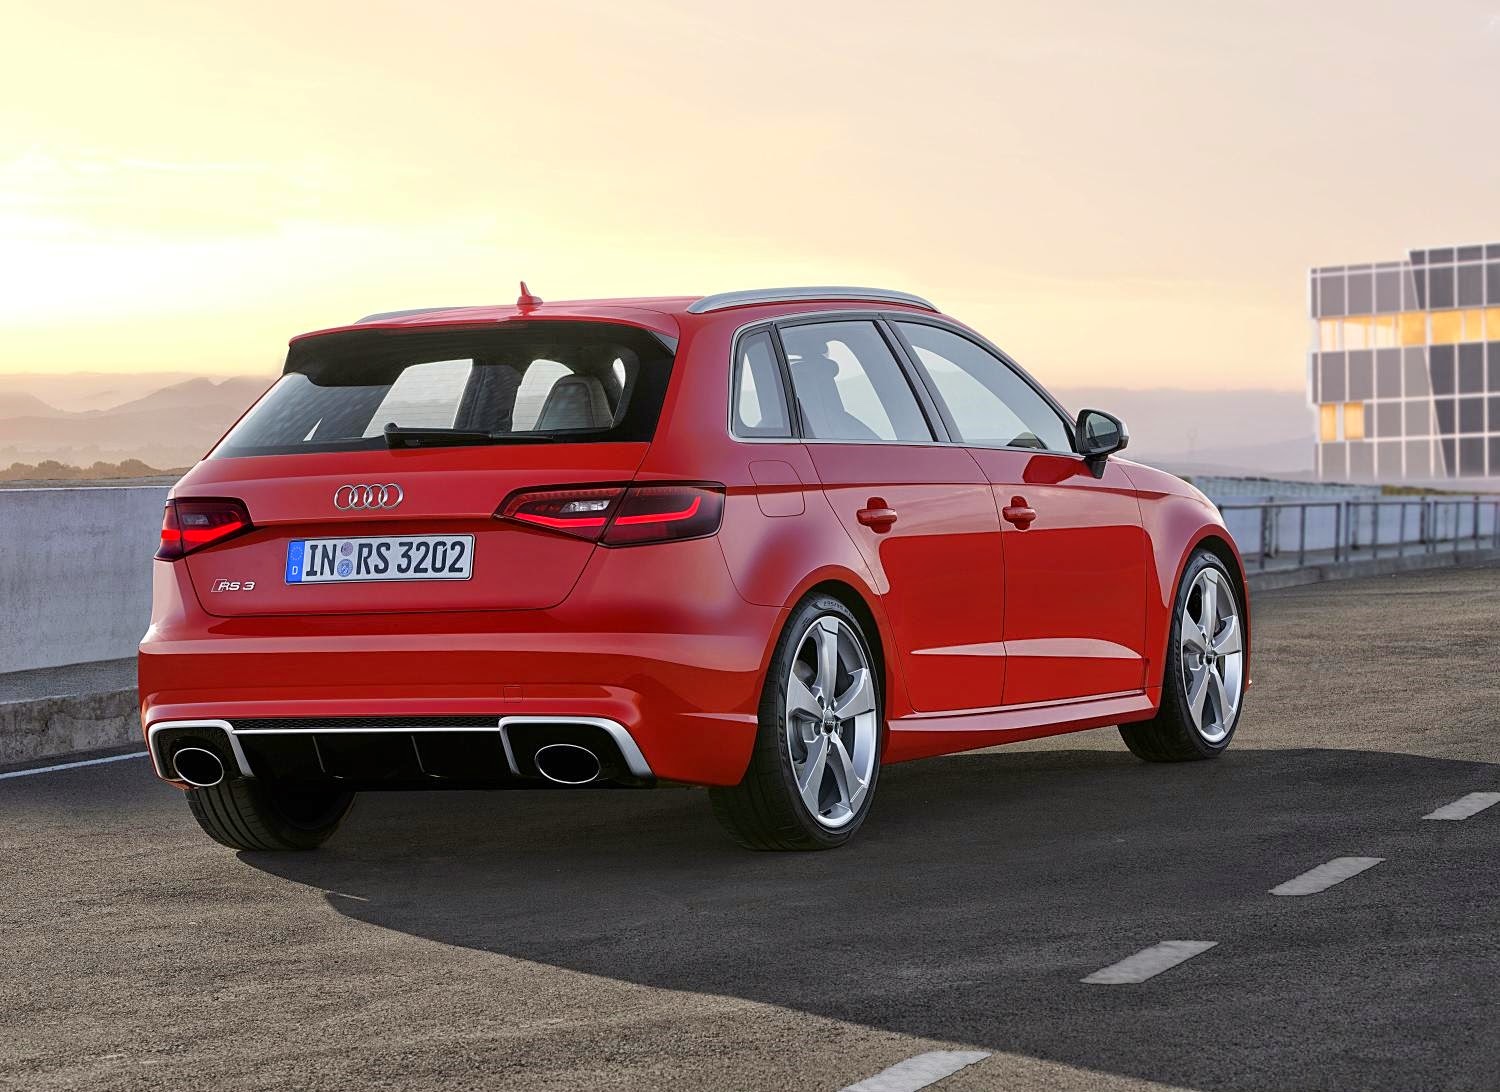 The Gearbox: Car news, Reviews and Advice: Audi release new RS3 details